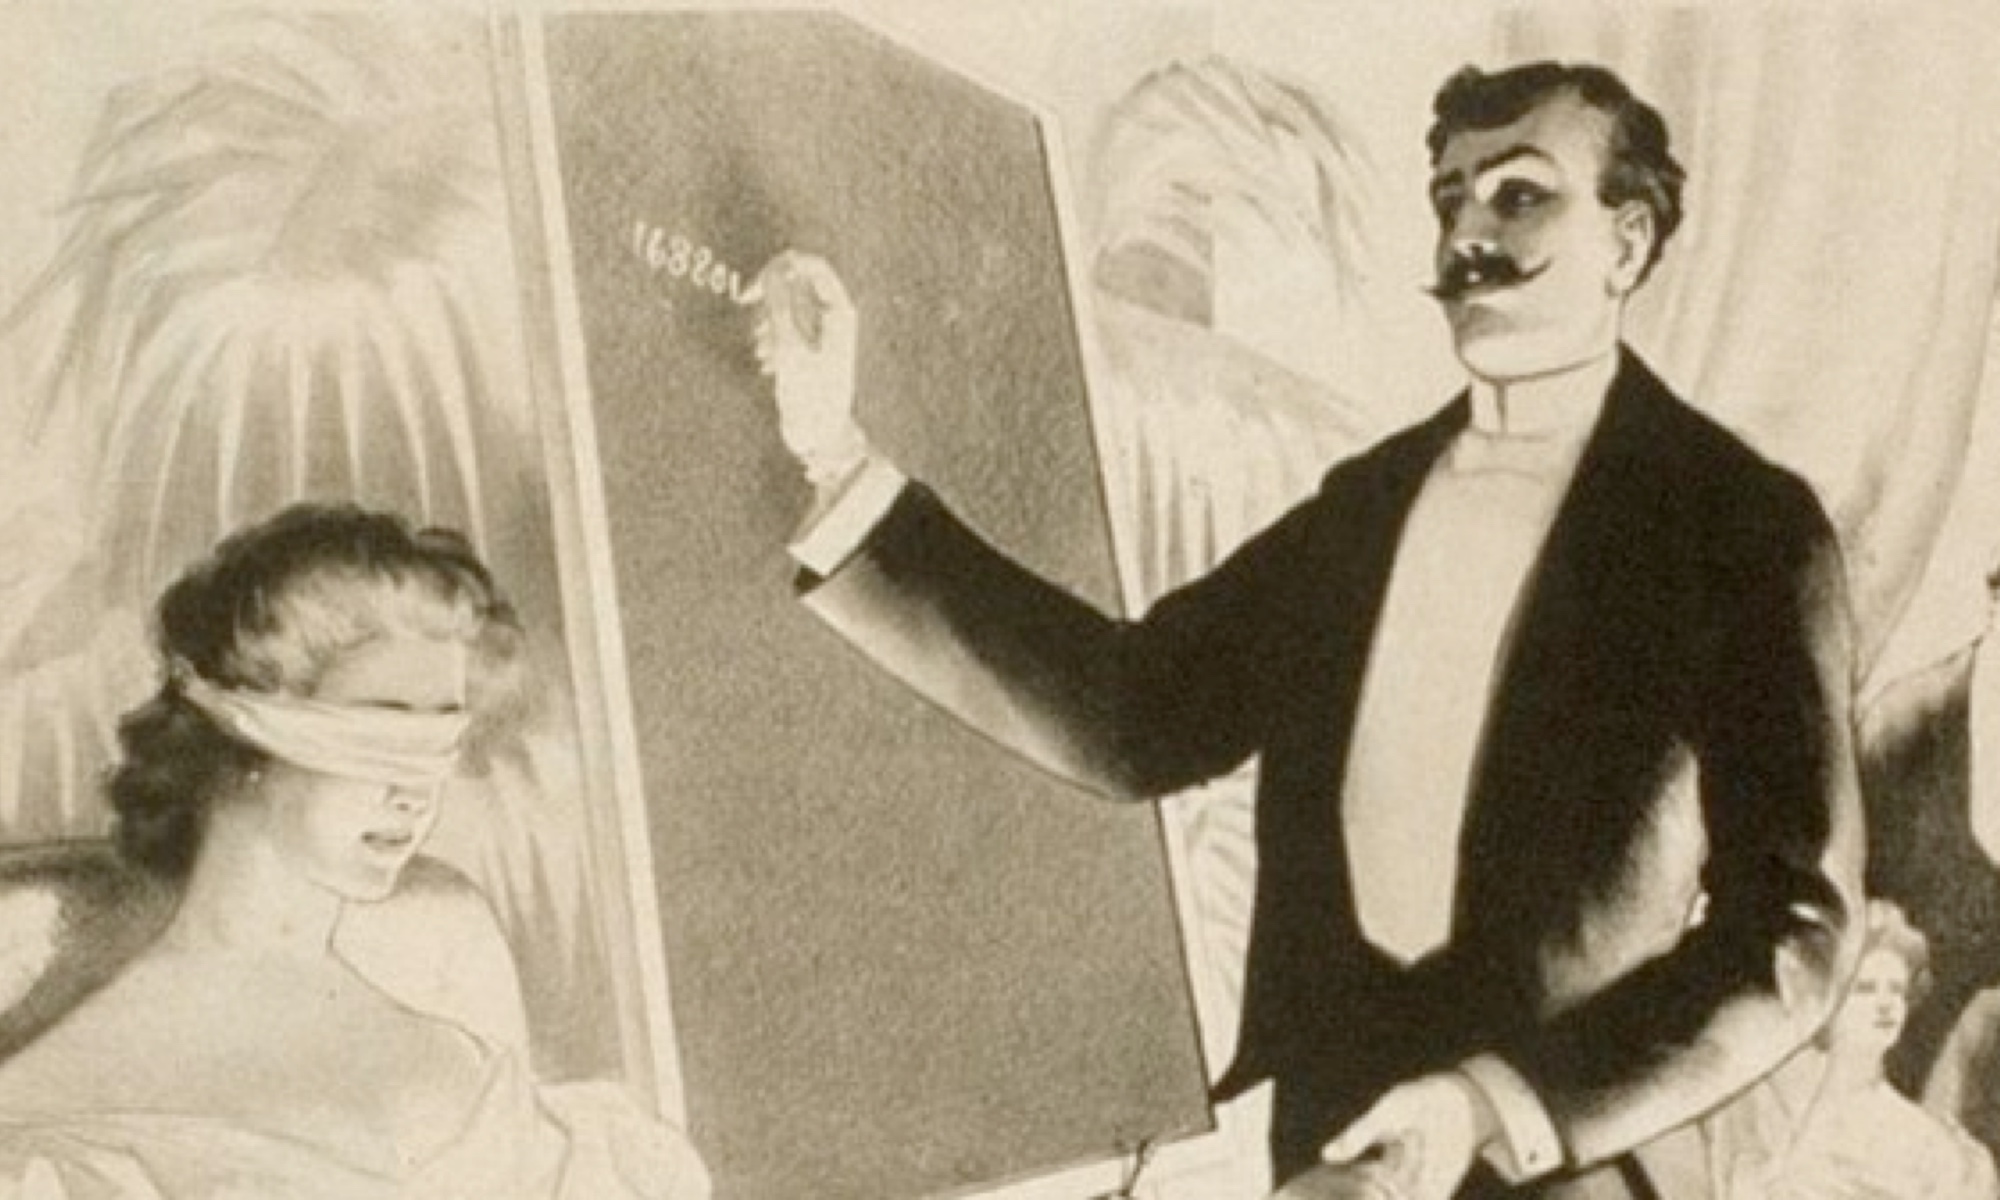 An old looking image, maybe 1920s-30s style of a man in a tuxedo reading the mind of a blindfolded woman.